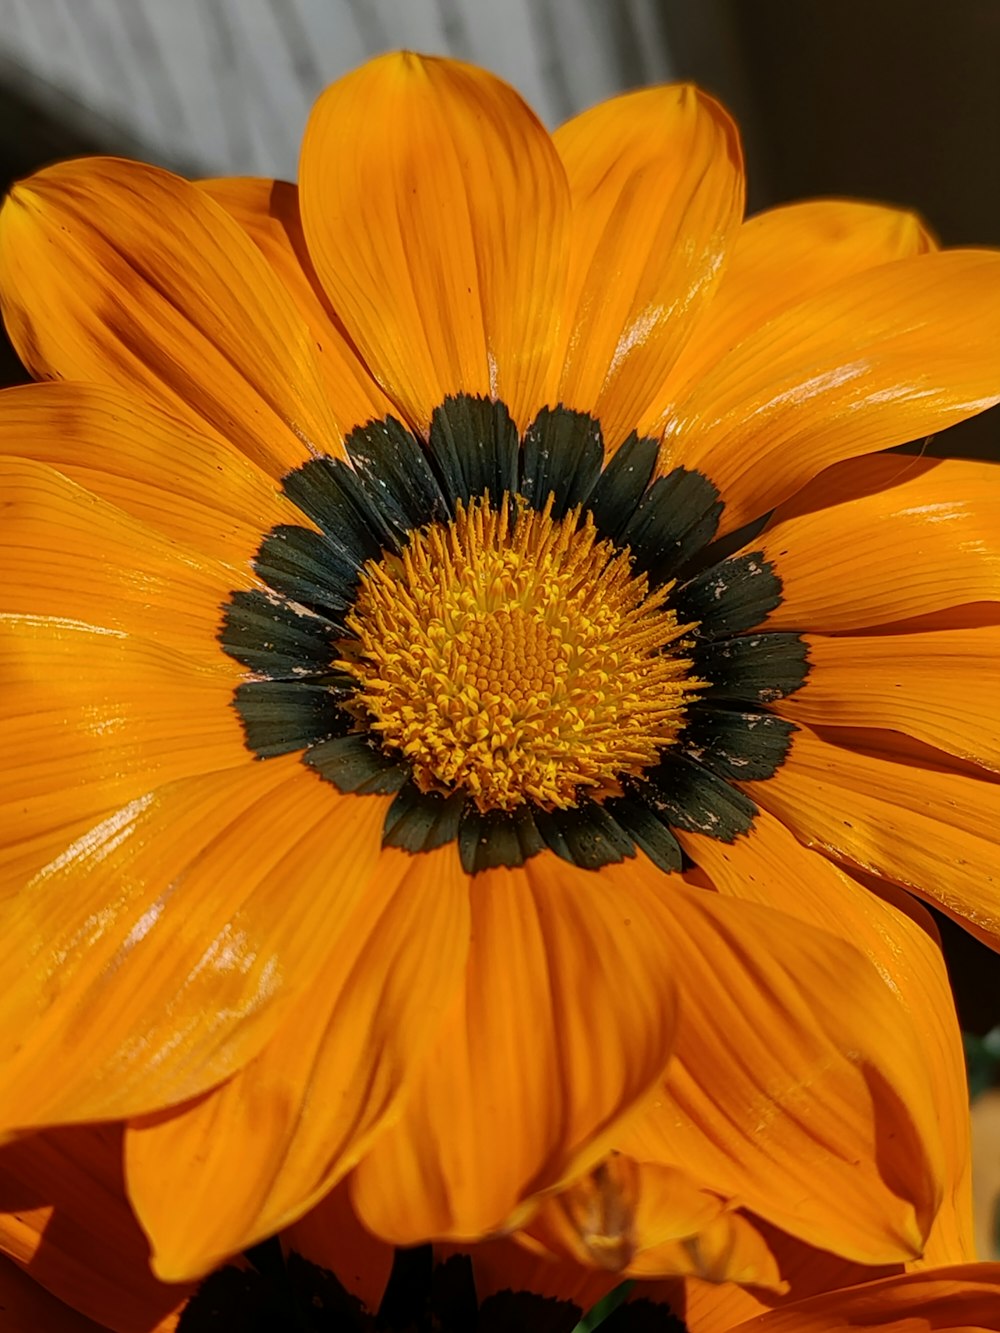 a close up of a yellow flower with a black center